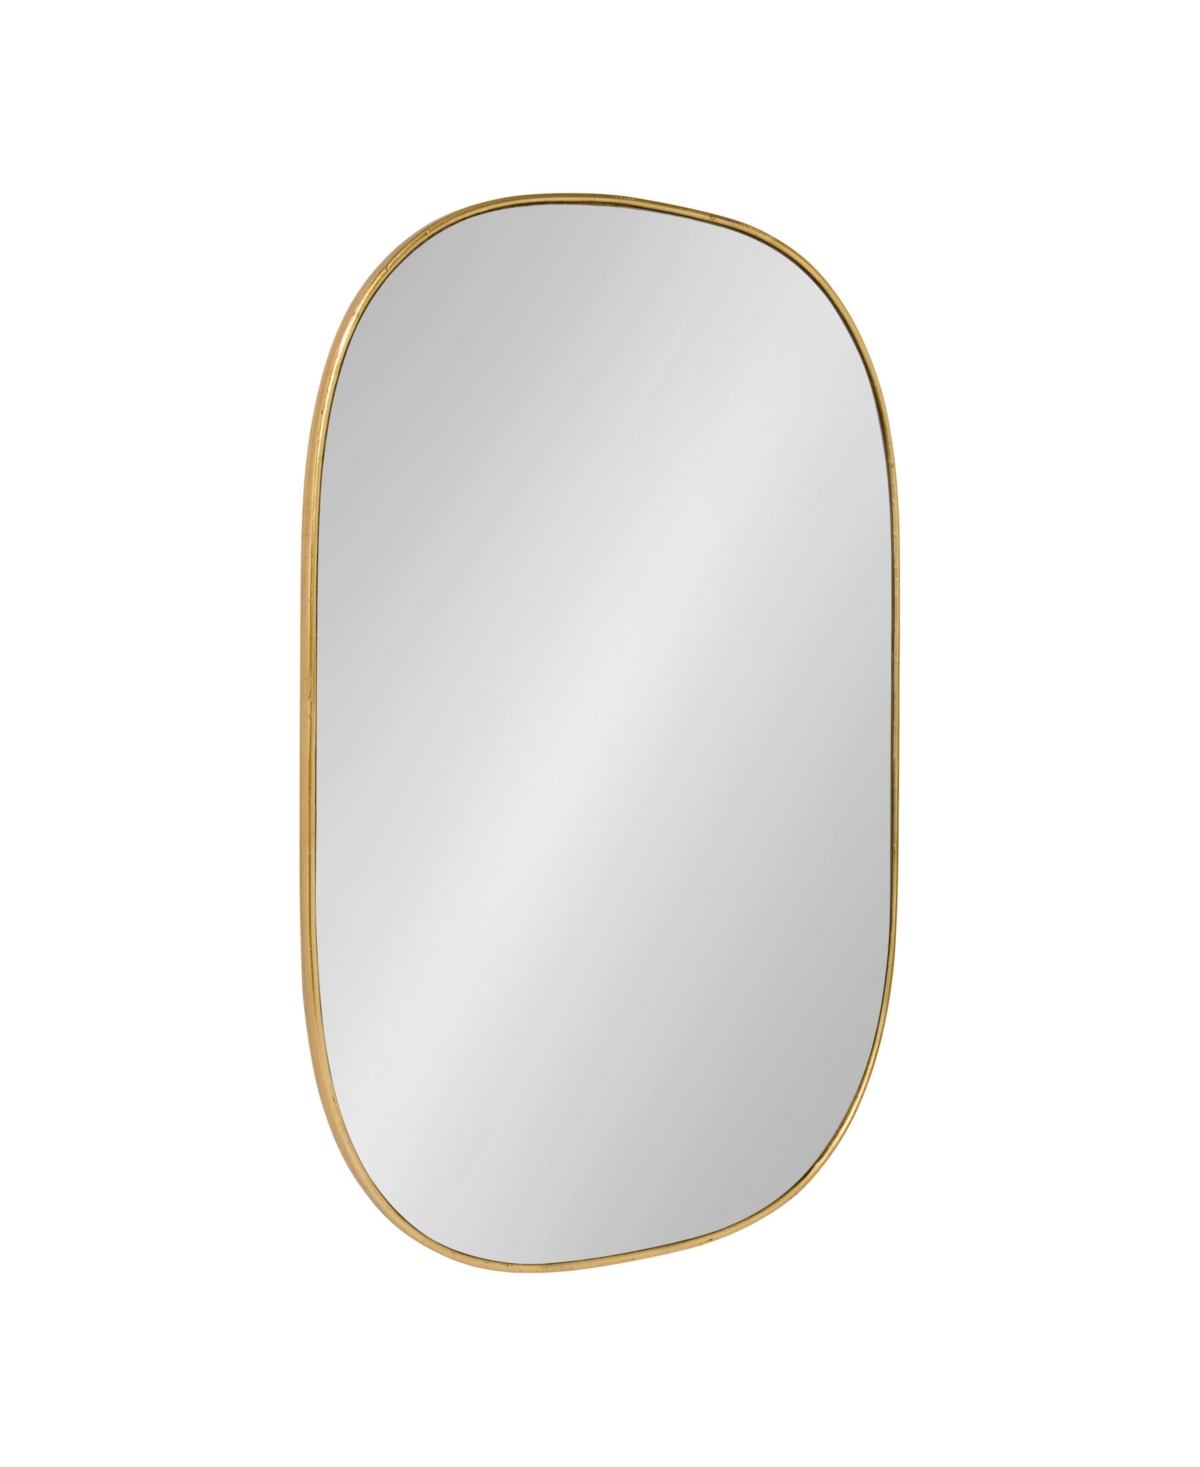 Caskill Rounded Rectangle Gold Leaf Wall Mirror - 24" x 36" - Gold